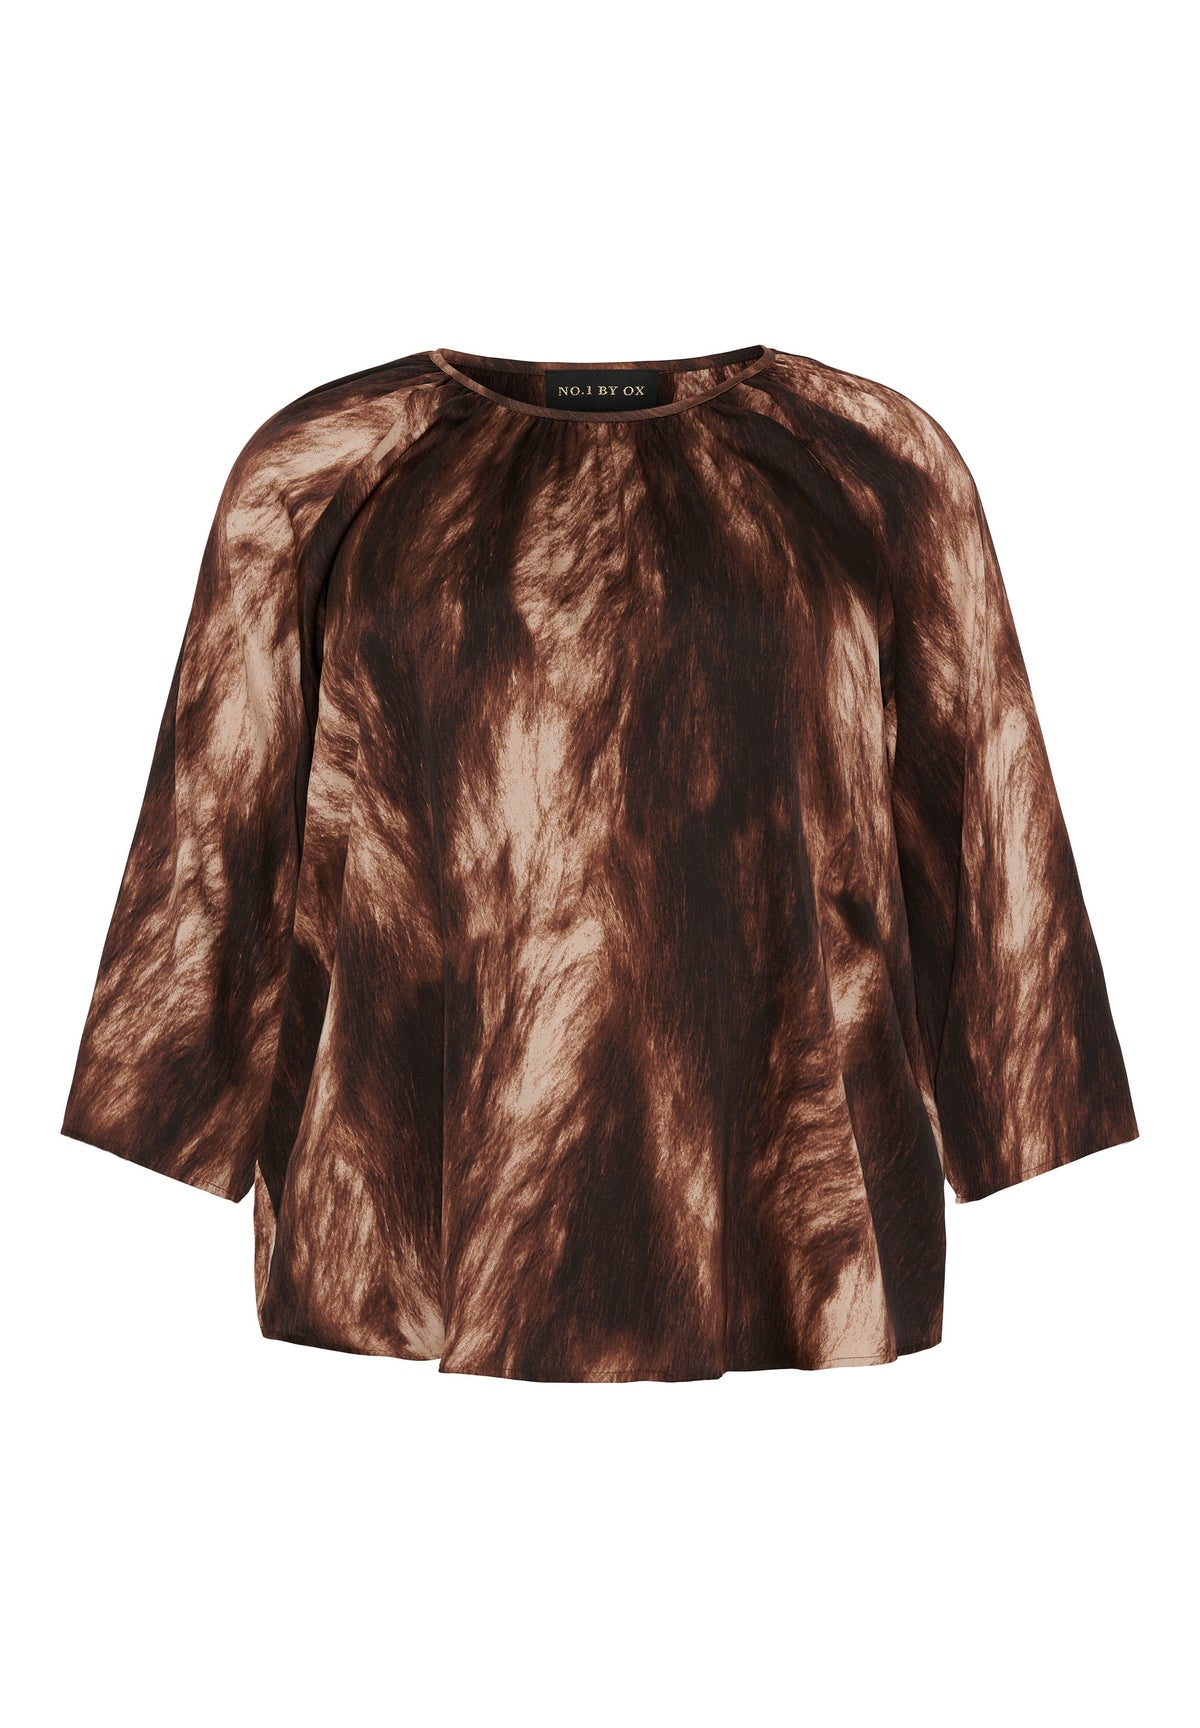 NO. 1 BY OX Printet bluse med 3/4 ærmer Bluser Mocca Brown and Cream Graphic Print